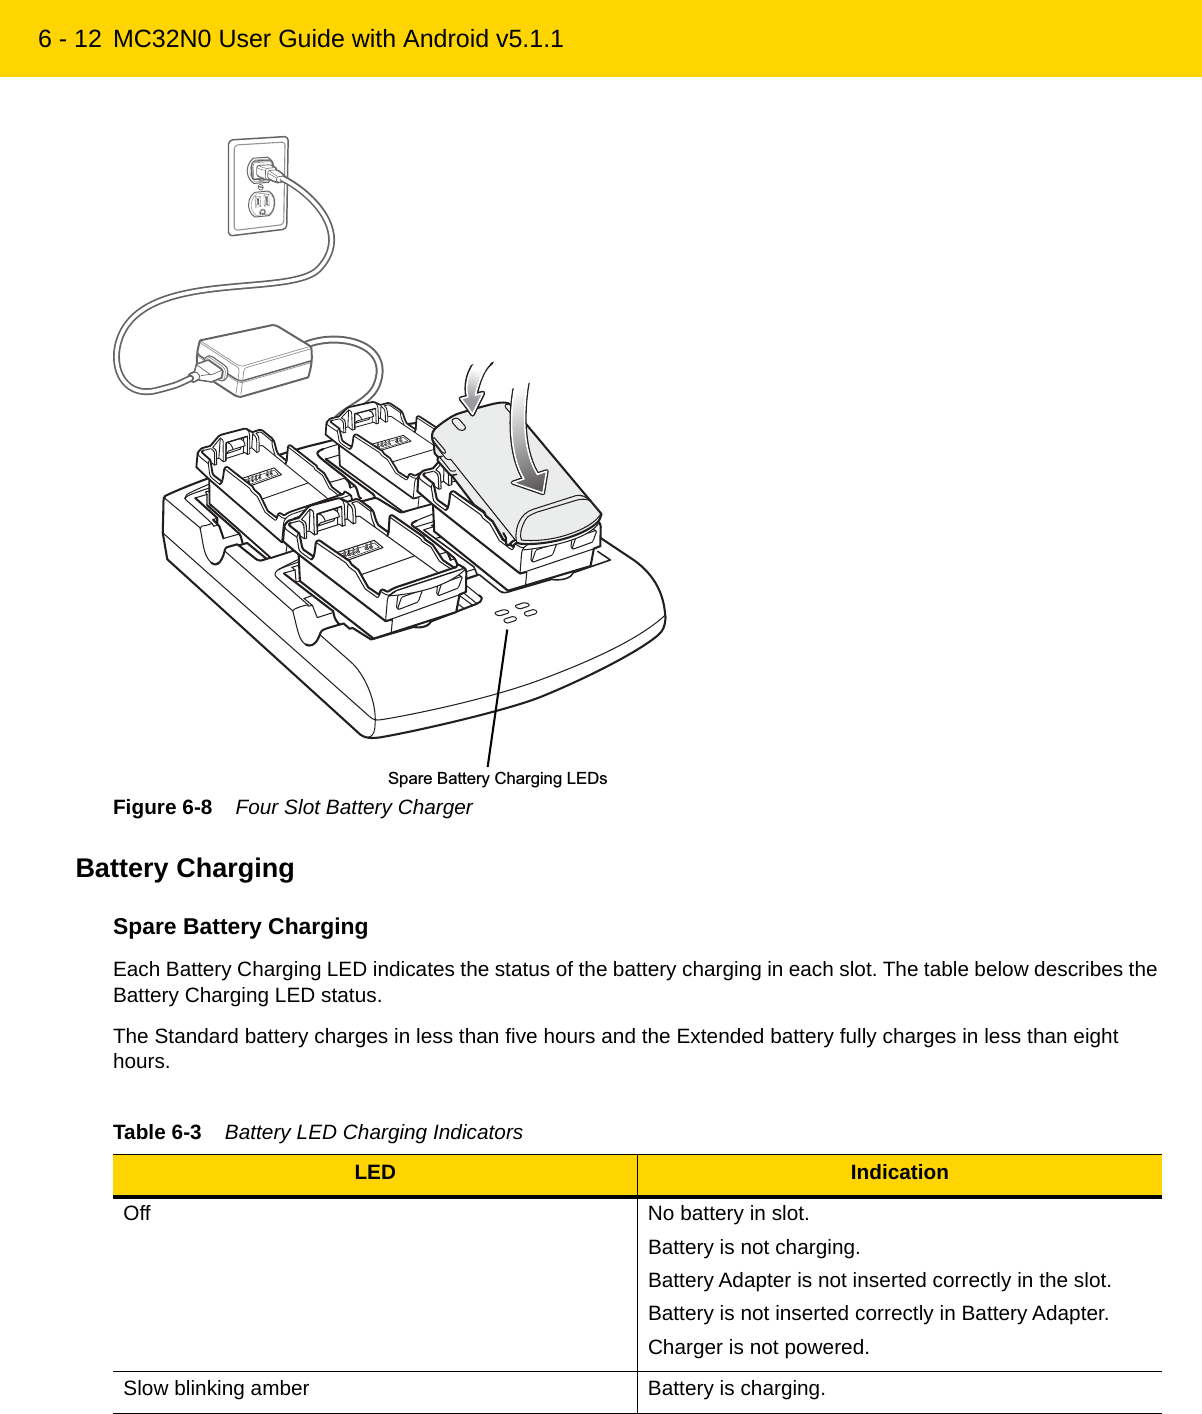 6 - 12 MC32N0 User Guide with Android v5.1.1Figure 6-8    Four Slot Battery ChargerBattery ChargingSpare Battery ChargingEach Battery Charging LED indicates the status of the battery charging in each slot. The table below describes the Battery Charging LED status.The Standard battery charges in less than five hours and the Extended battery fully charges in less than eight hours.Spare Battery Charging LEDsTable 6-3    Battery LED Charging Indicators LED IndicationOff No battery in slot.Battery is not charging.Battery Adapter is not inserted correctly in the slot.Battery is not inserted correctly in Battery Adapter.Charger is not powered.Slow blinking amber Battery is charging.REVIEW ONLY - REVIEW ONLY - REVIEW ONLY                             REVIEW ONLY - REVIEW ONLY - REVIEW ONLY